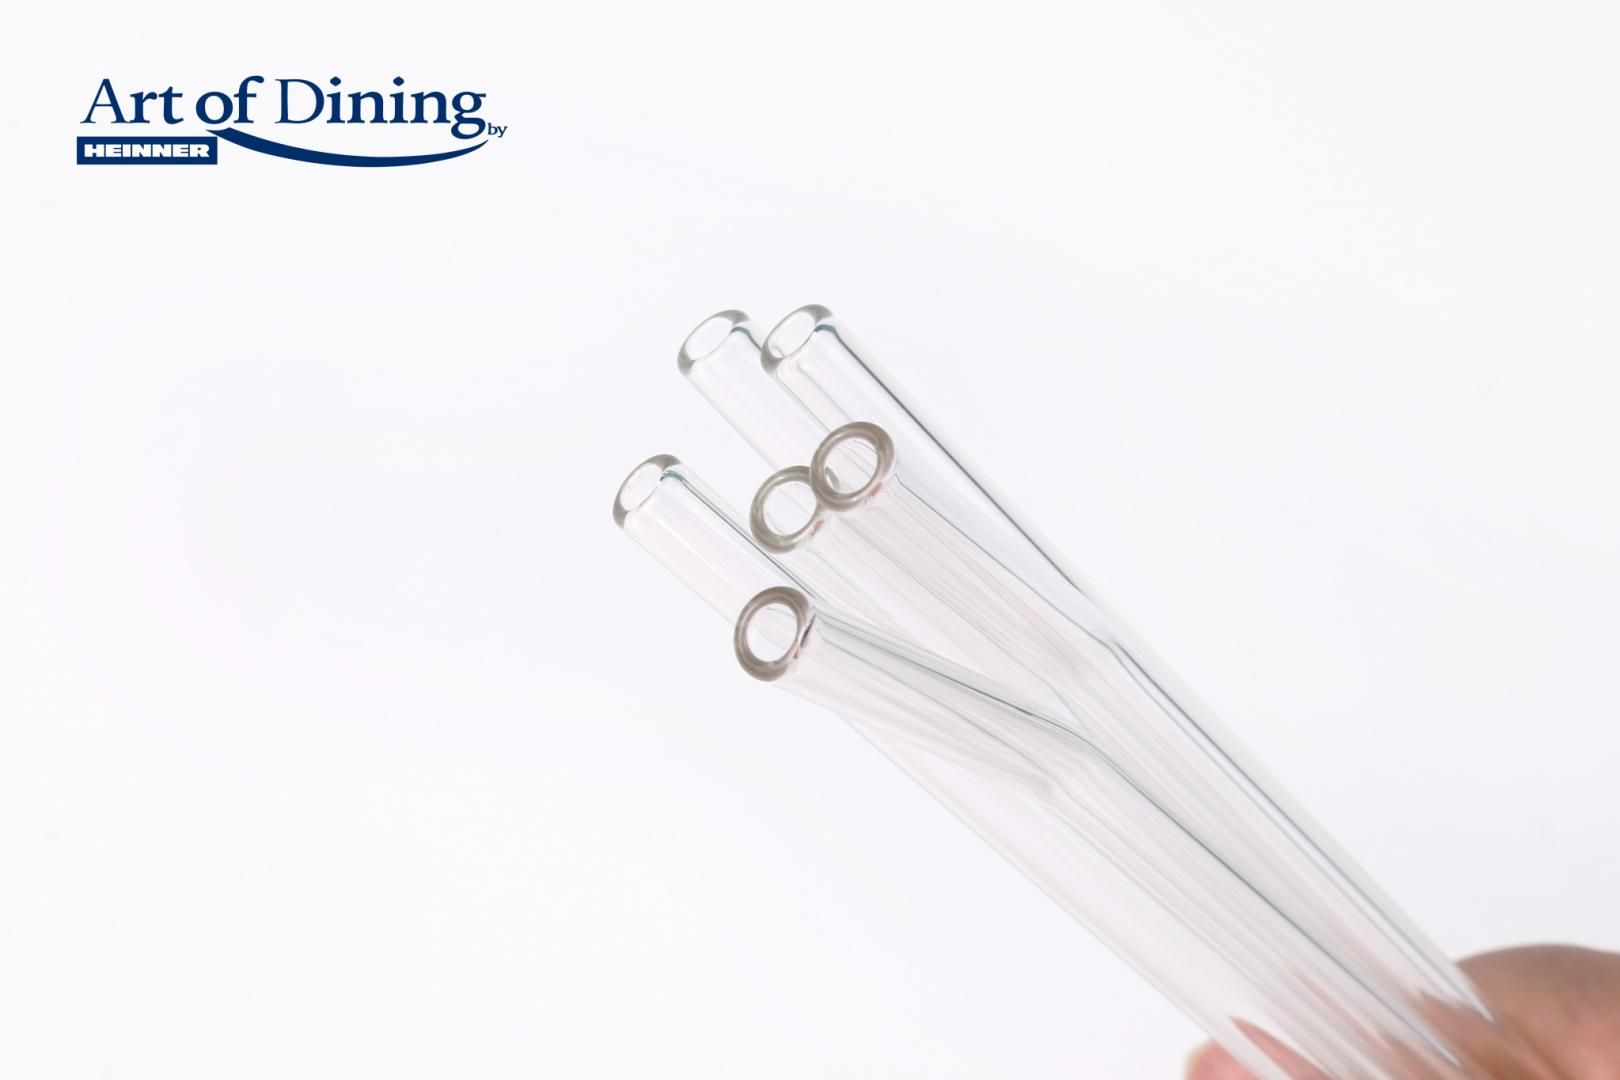 SET OF 6 STRAWS MADE OF GLASS + BRUSH FOR CLEANING the set contains: : 3 x straight straw + 3 x bent straw + 1 x brush for cleaning Sizes:200*8mm Weight / straw : 14.5g Material thickness:1.5 mm Color: transparent_1